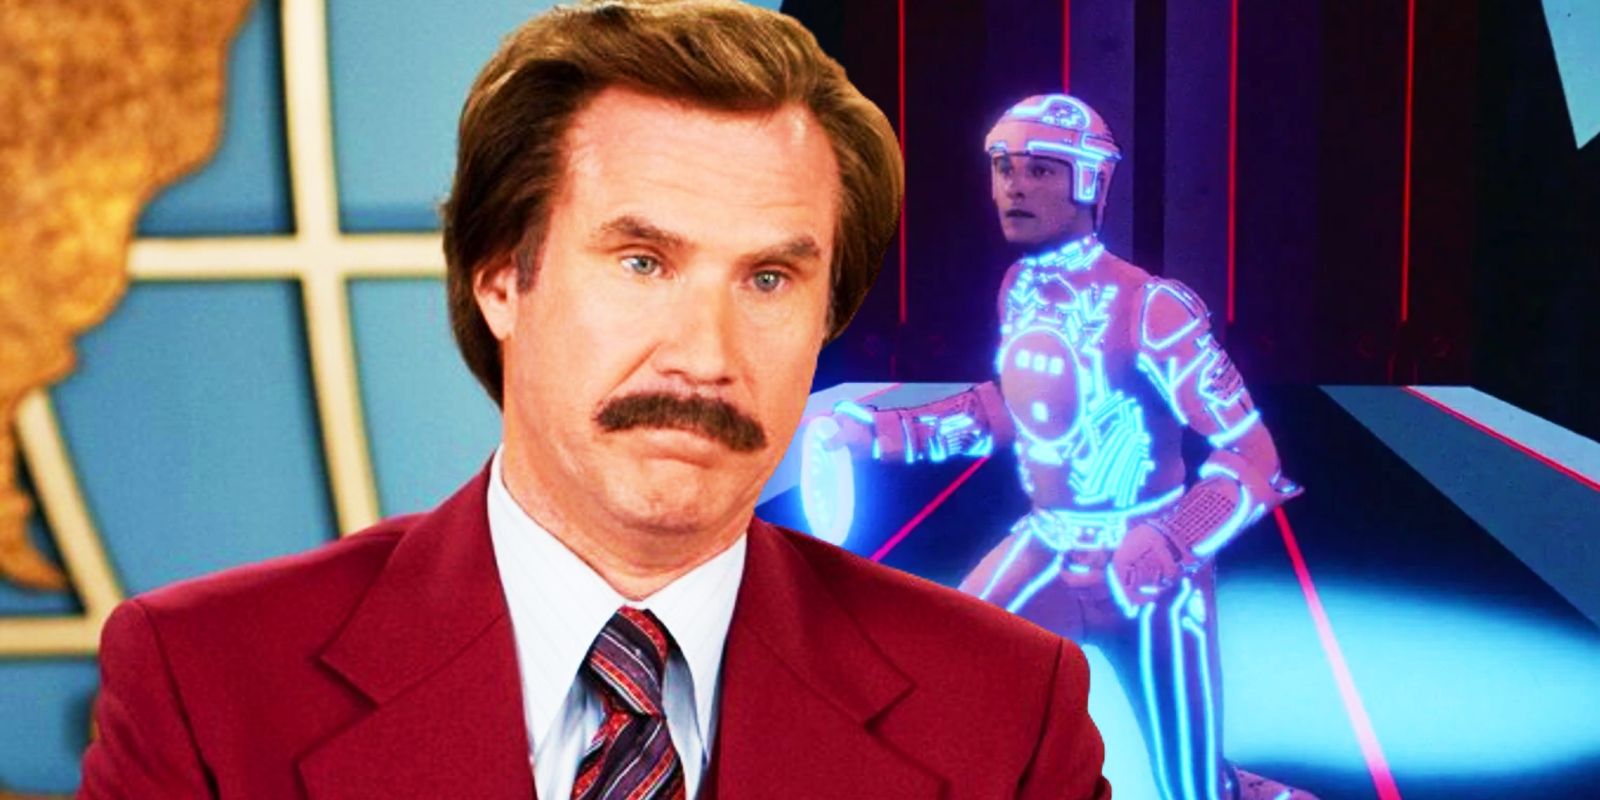 anchorman’s-ron-burgundy-suits-up-for-tron-in-bizarre-crossover-art